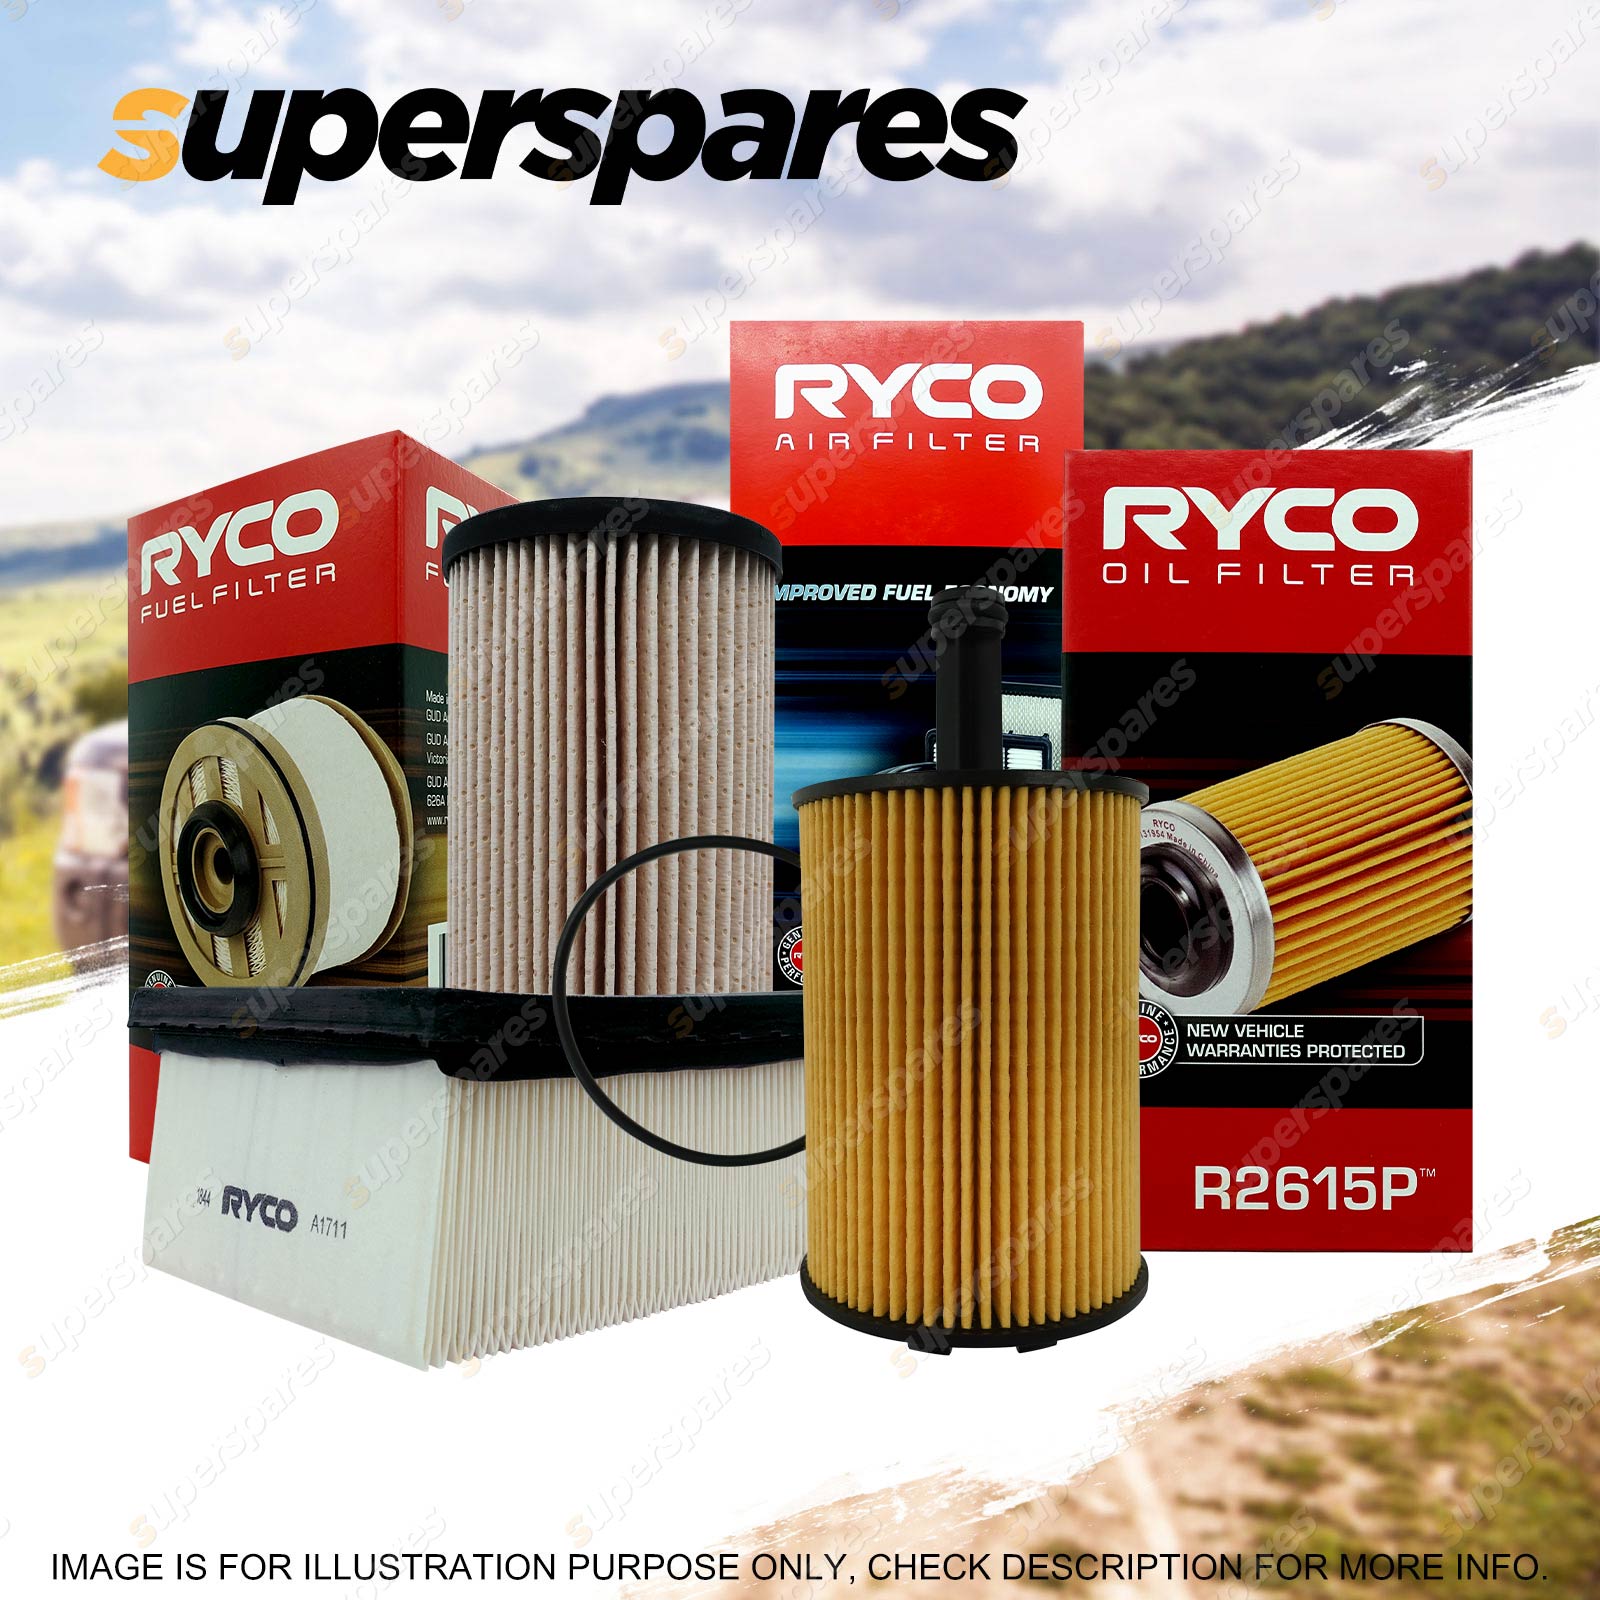 Ryco Oil Air Fuel Filter Service Kit for Audi A3 8P TDI ...